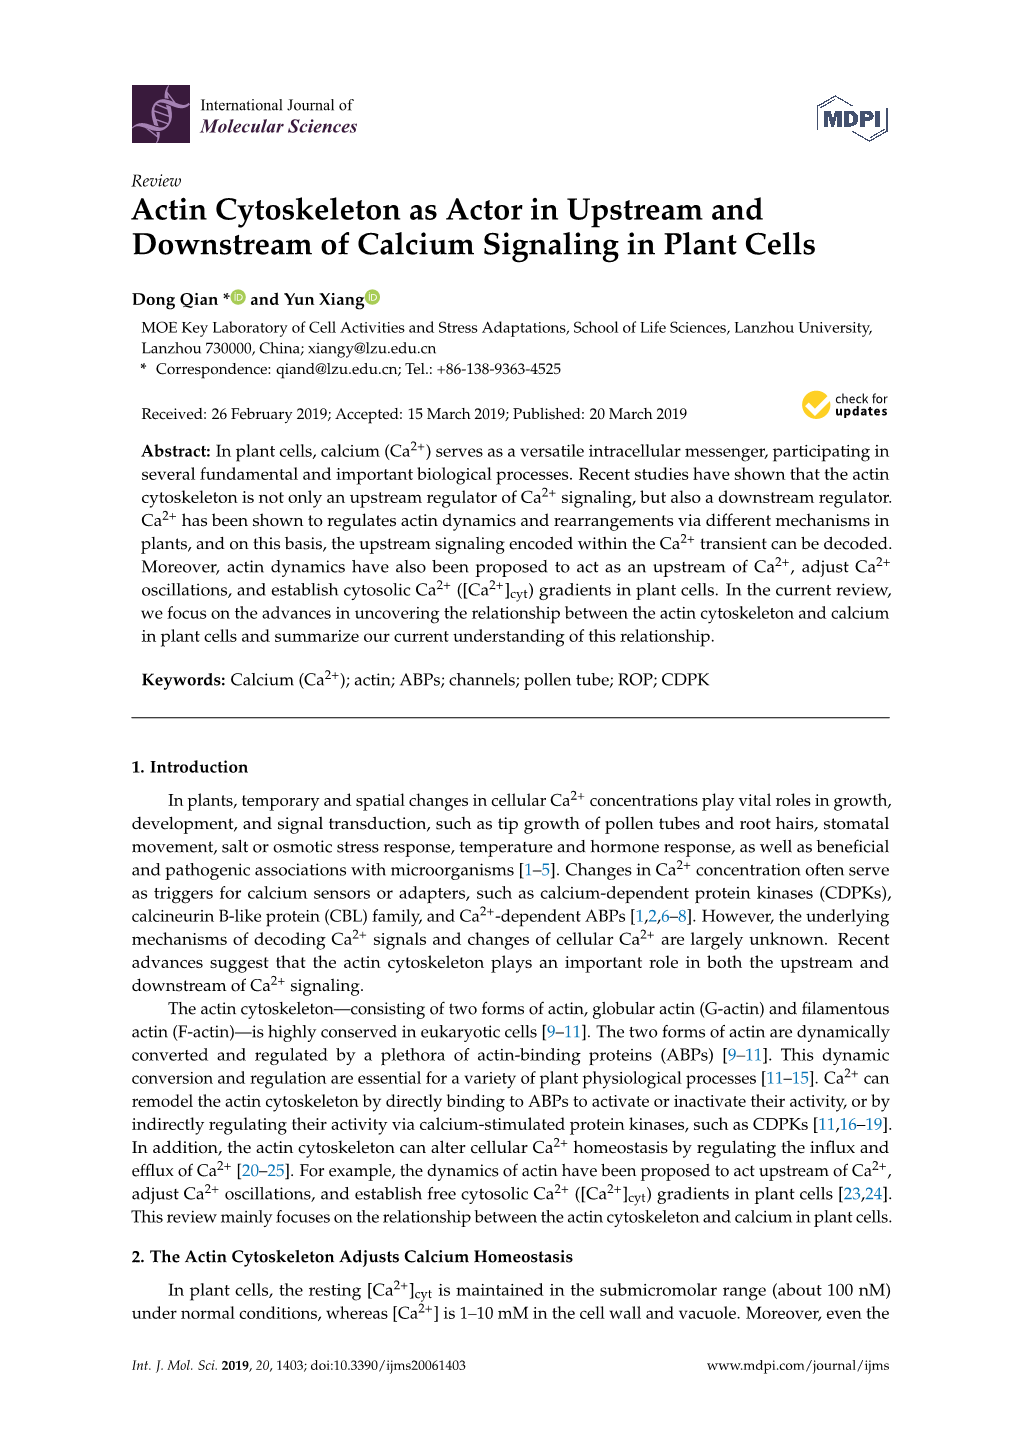 Actin Cytoskeleton As Actor in Upstream and Downstream of Calcium Signaling in Plant Cells